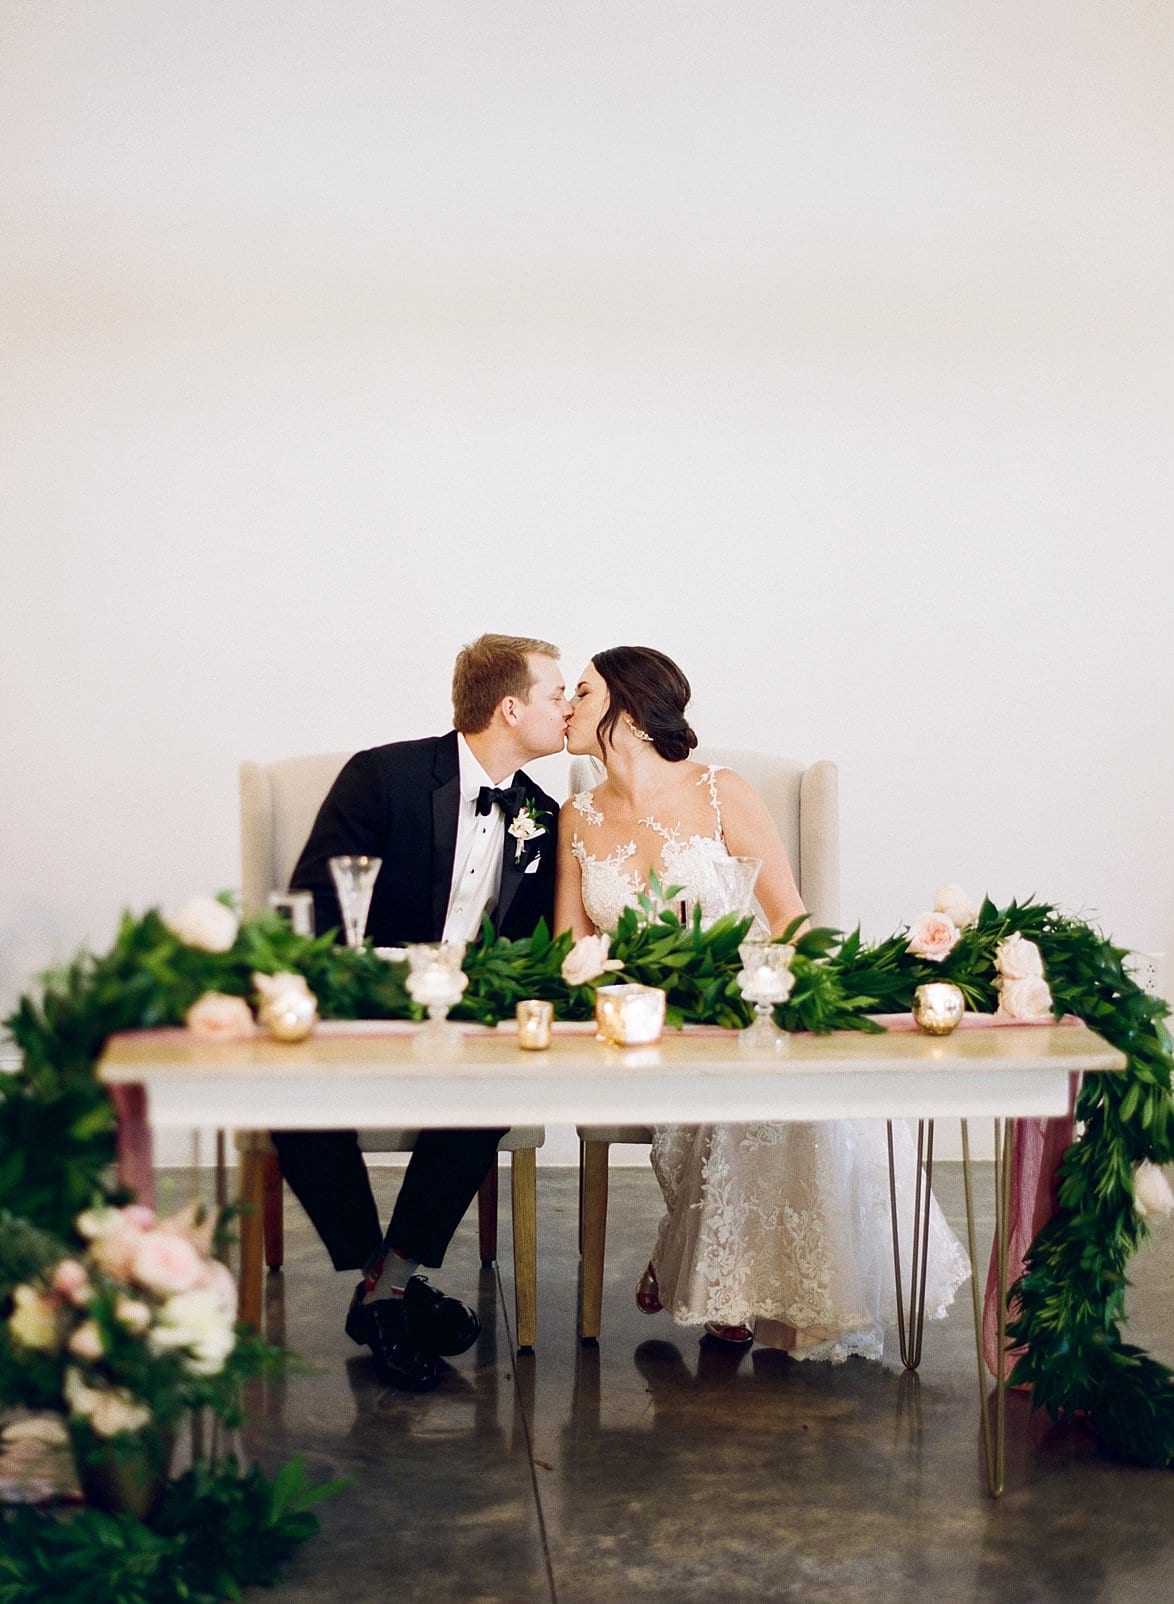 Merrimon Wynne bride and groom kissing while kissing at the sweetheart table draped with greenery and candles across it photo